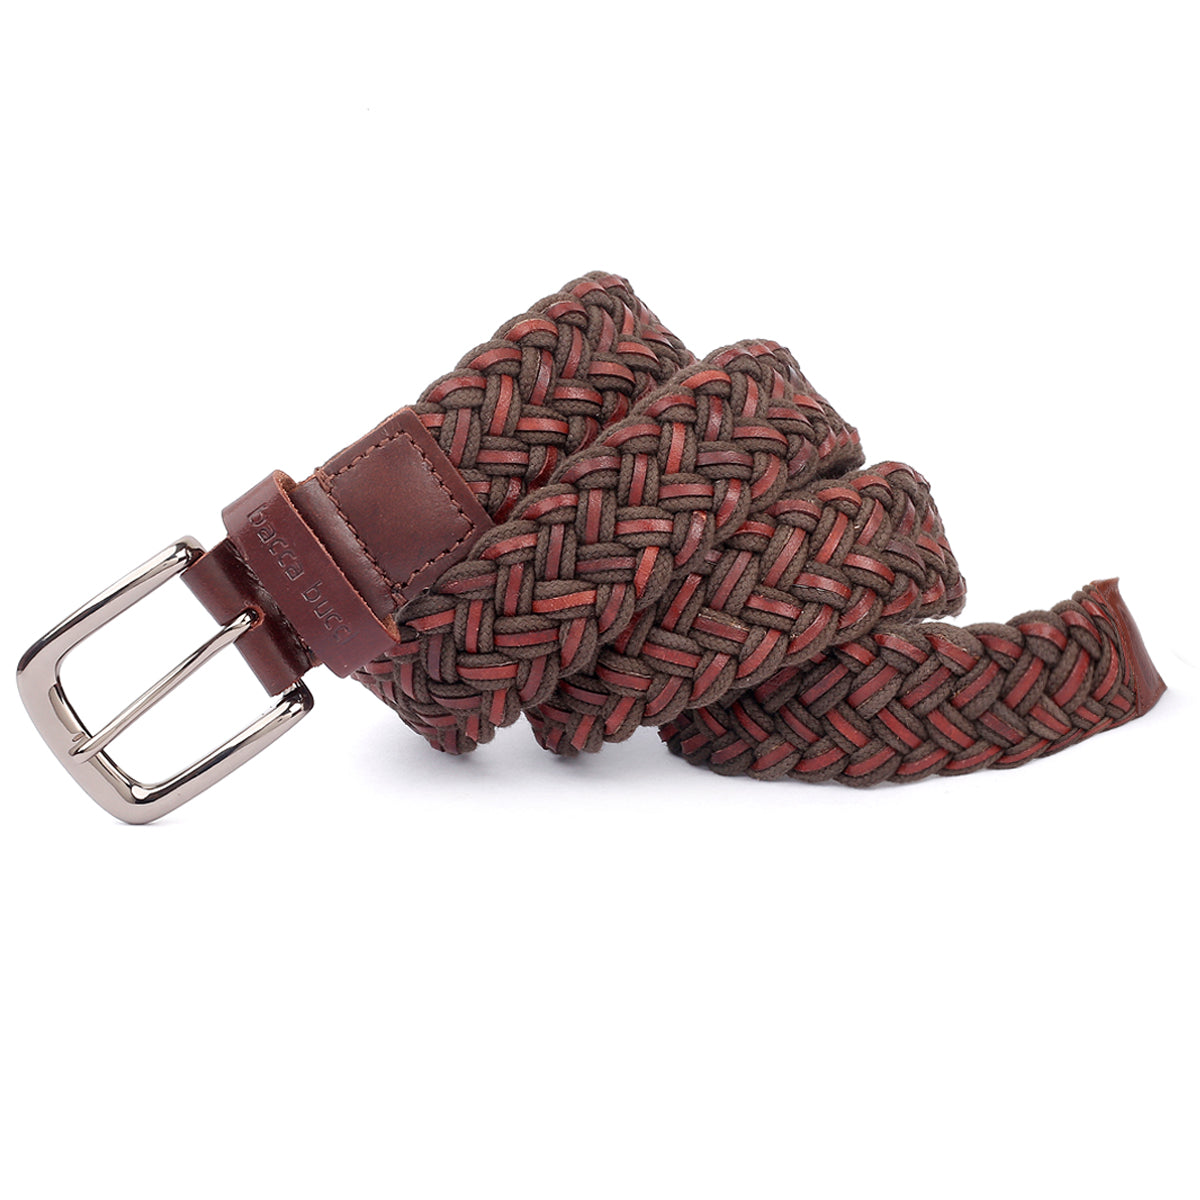 Bacca Bucci Woven leather and Cotton Elastic braided belt for men with Alloy buckle